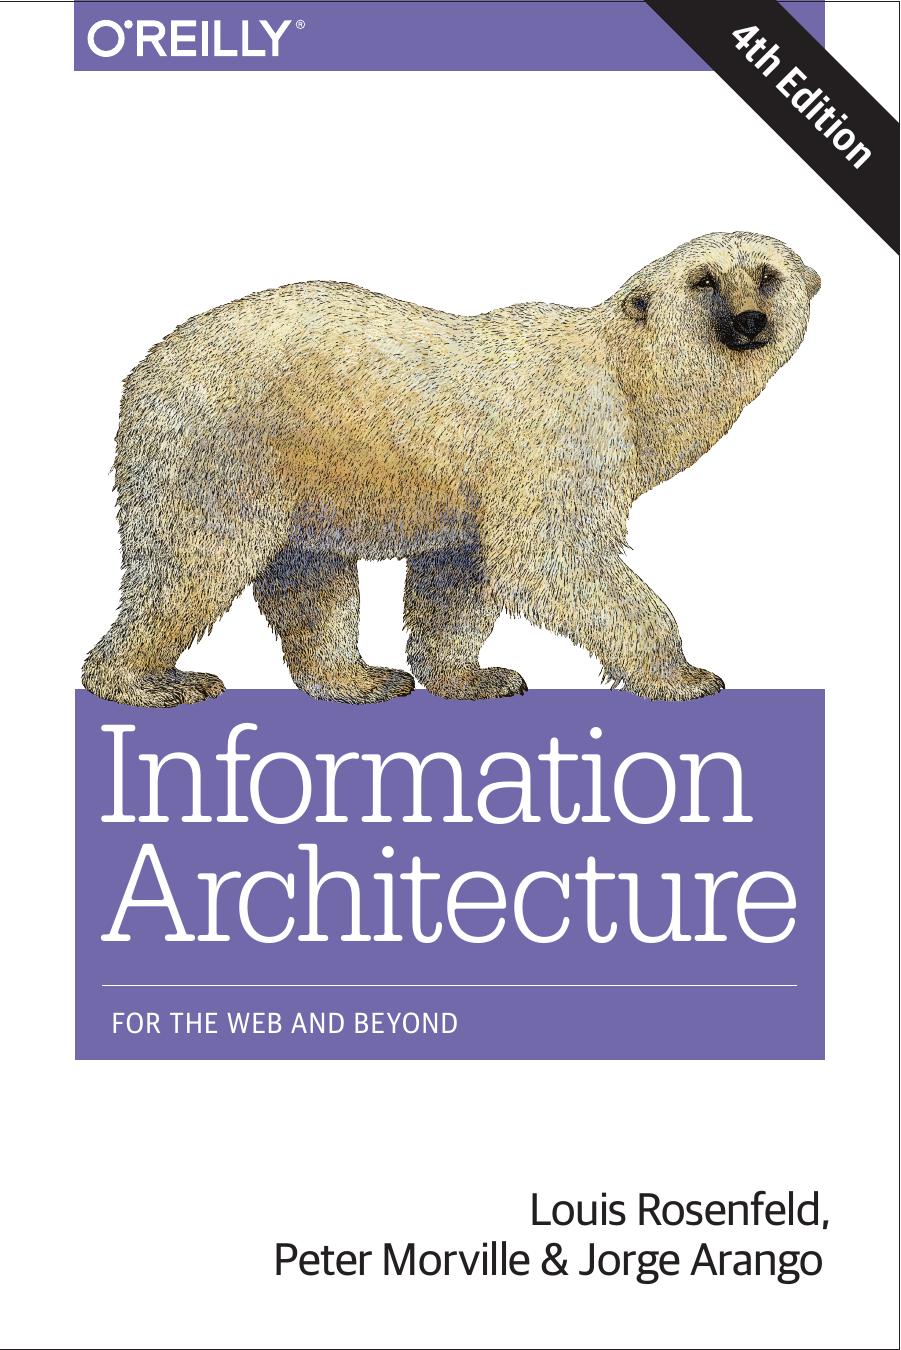 Information Architecture: For the Web and Beyond by Louis Rosenfeld Peter Morville and Jorge Arango